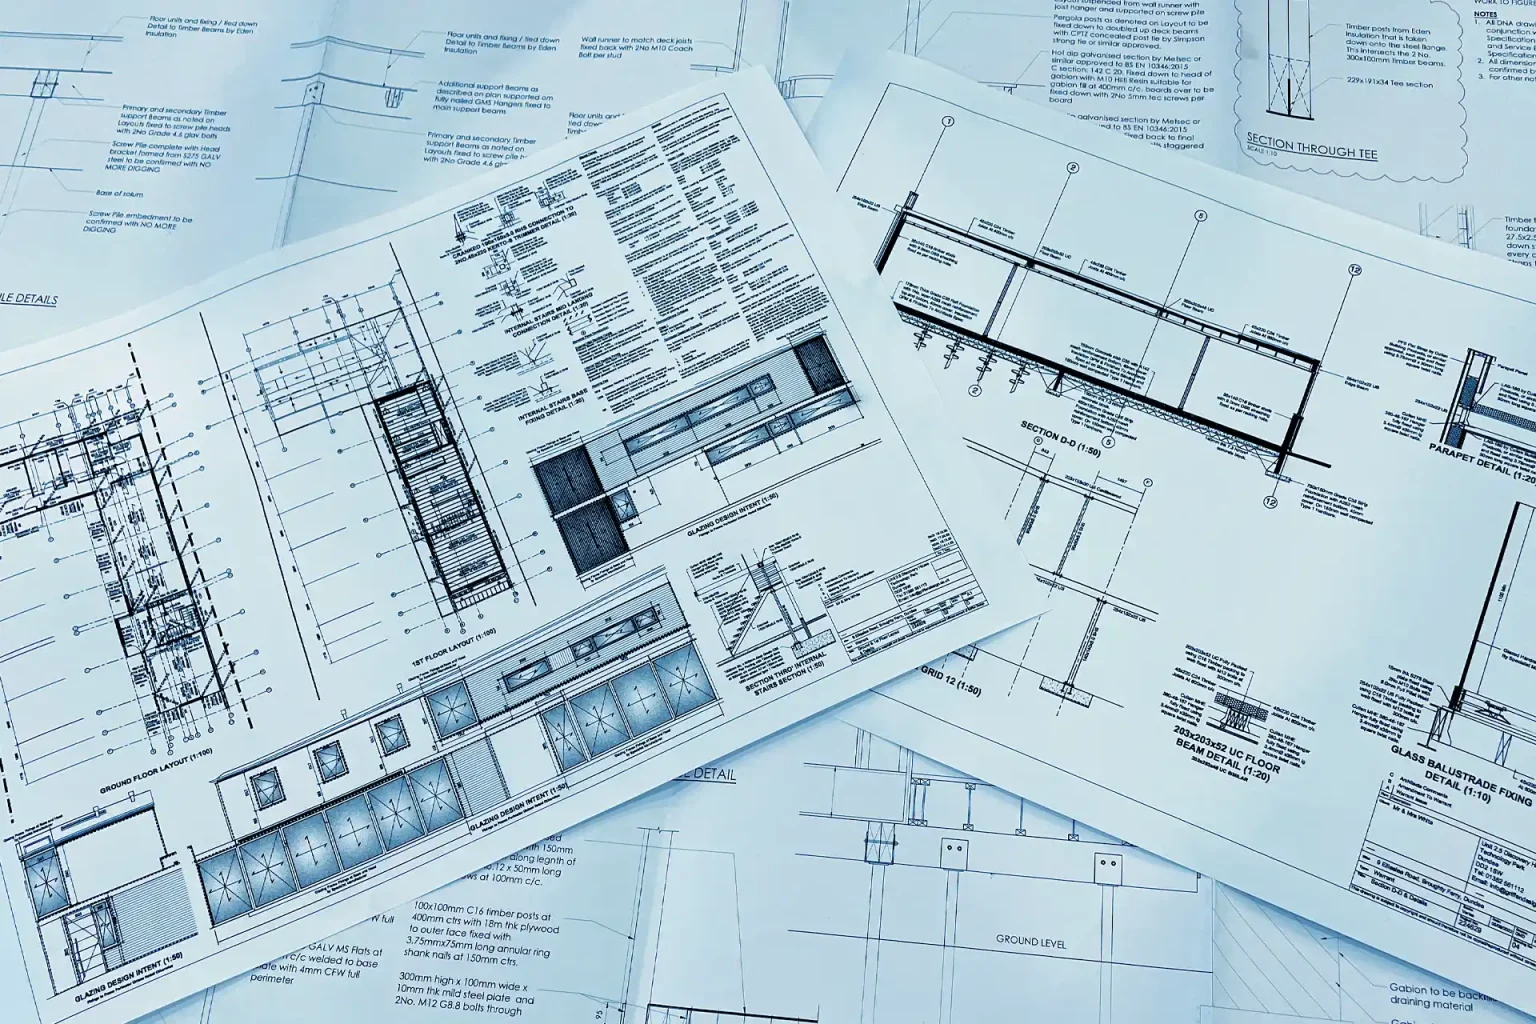 Project design and planning | RADIX